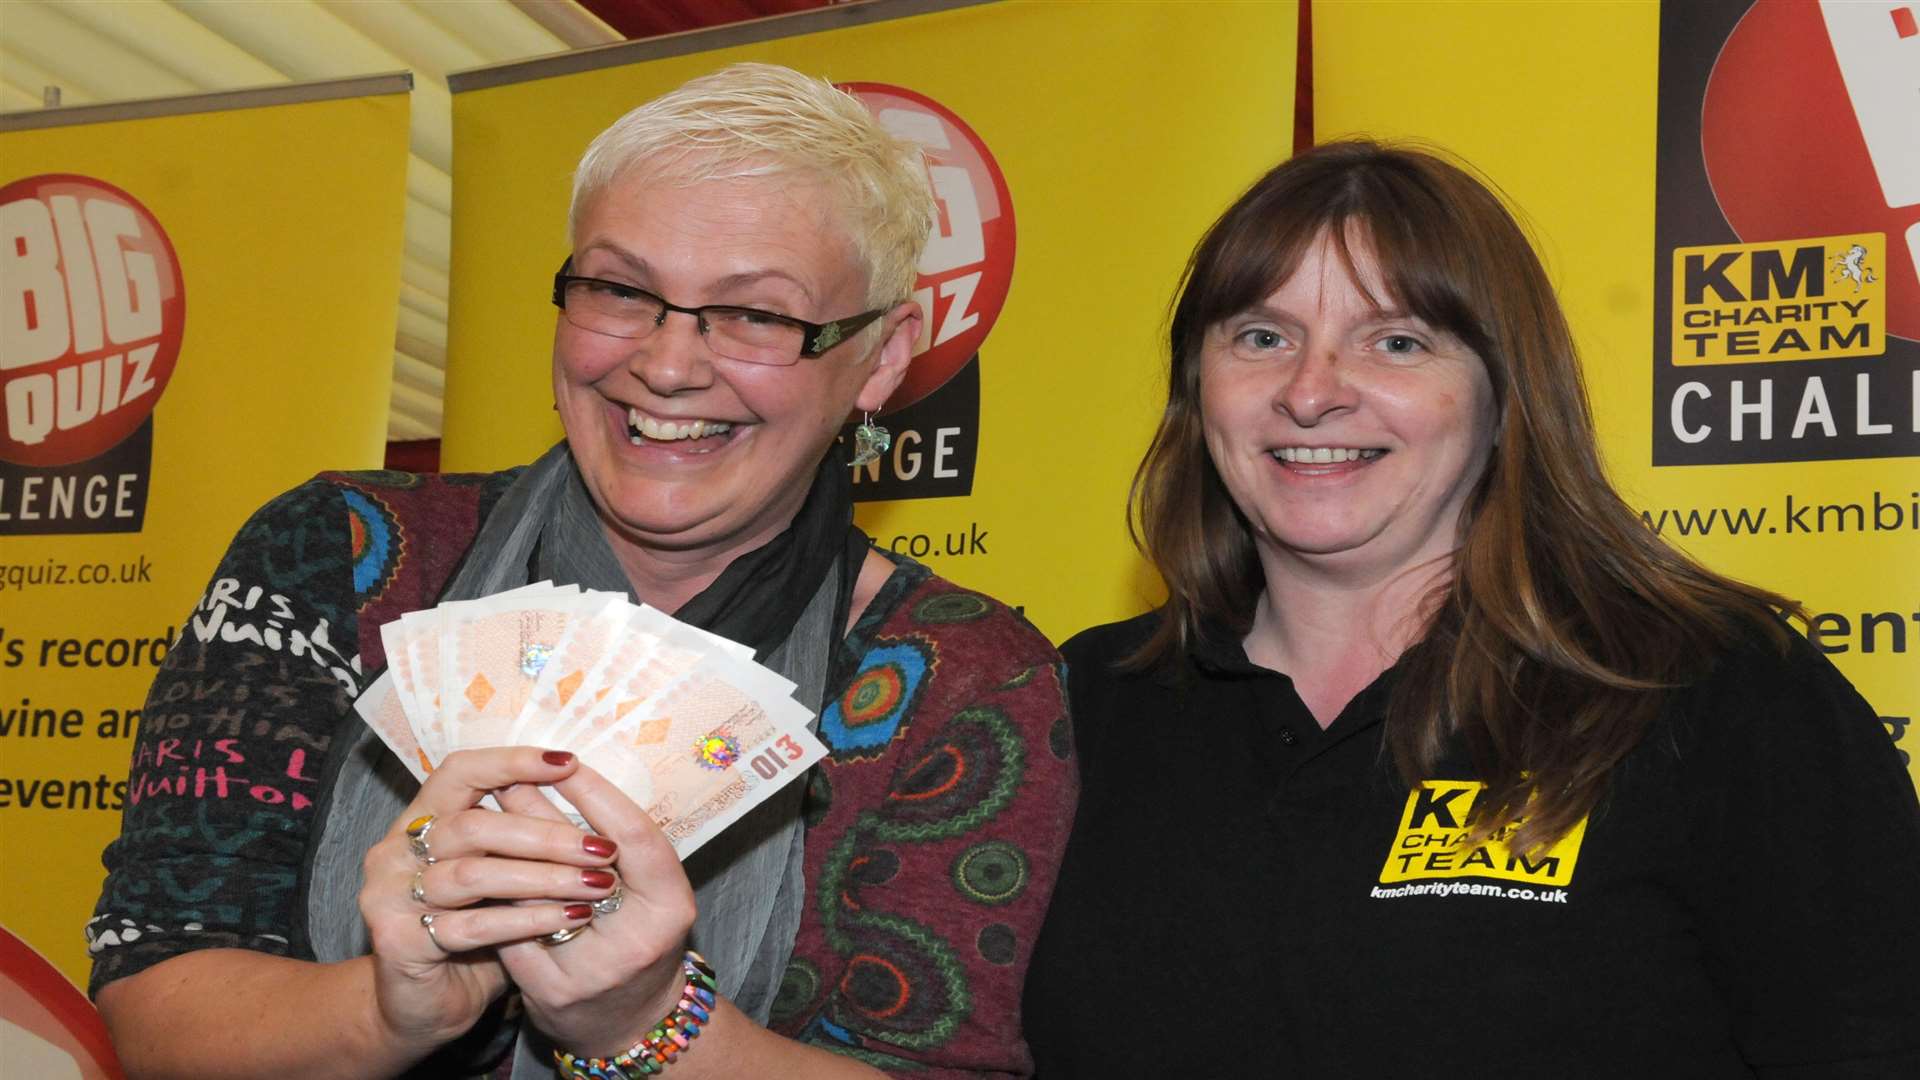 Amanda Van Der Straaten won the on the spot cash prize of £100 at the 2014 Medway Big Charity Quiz.